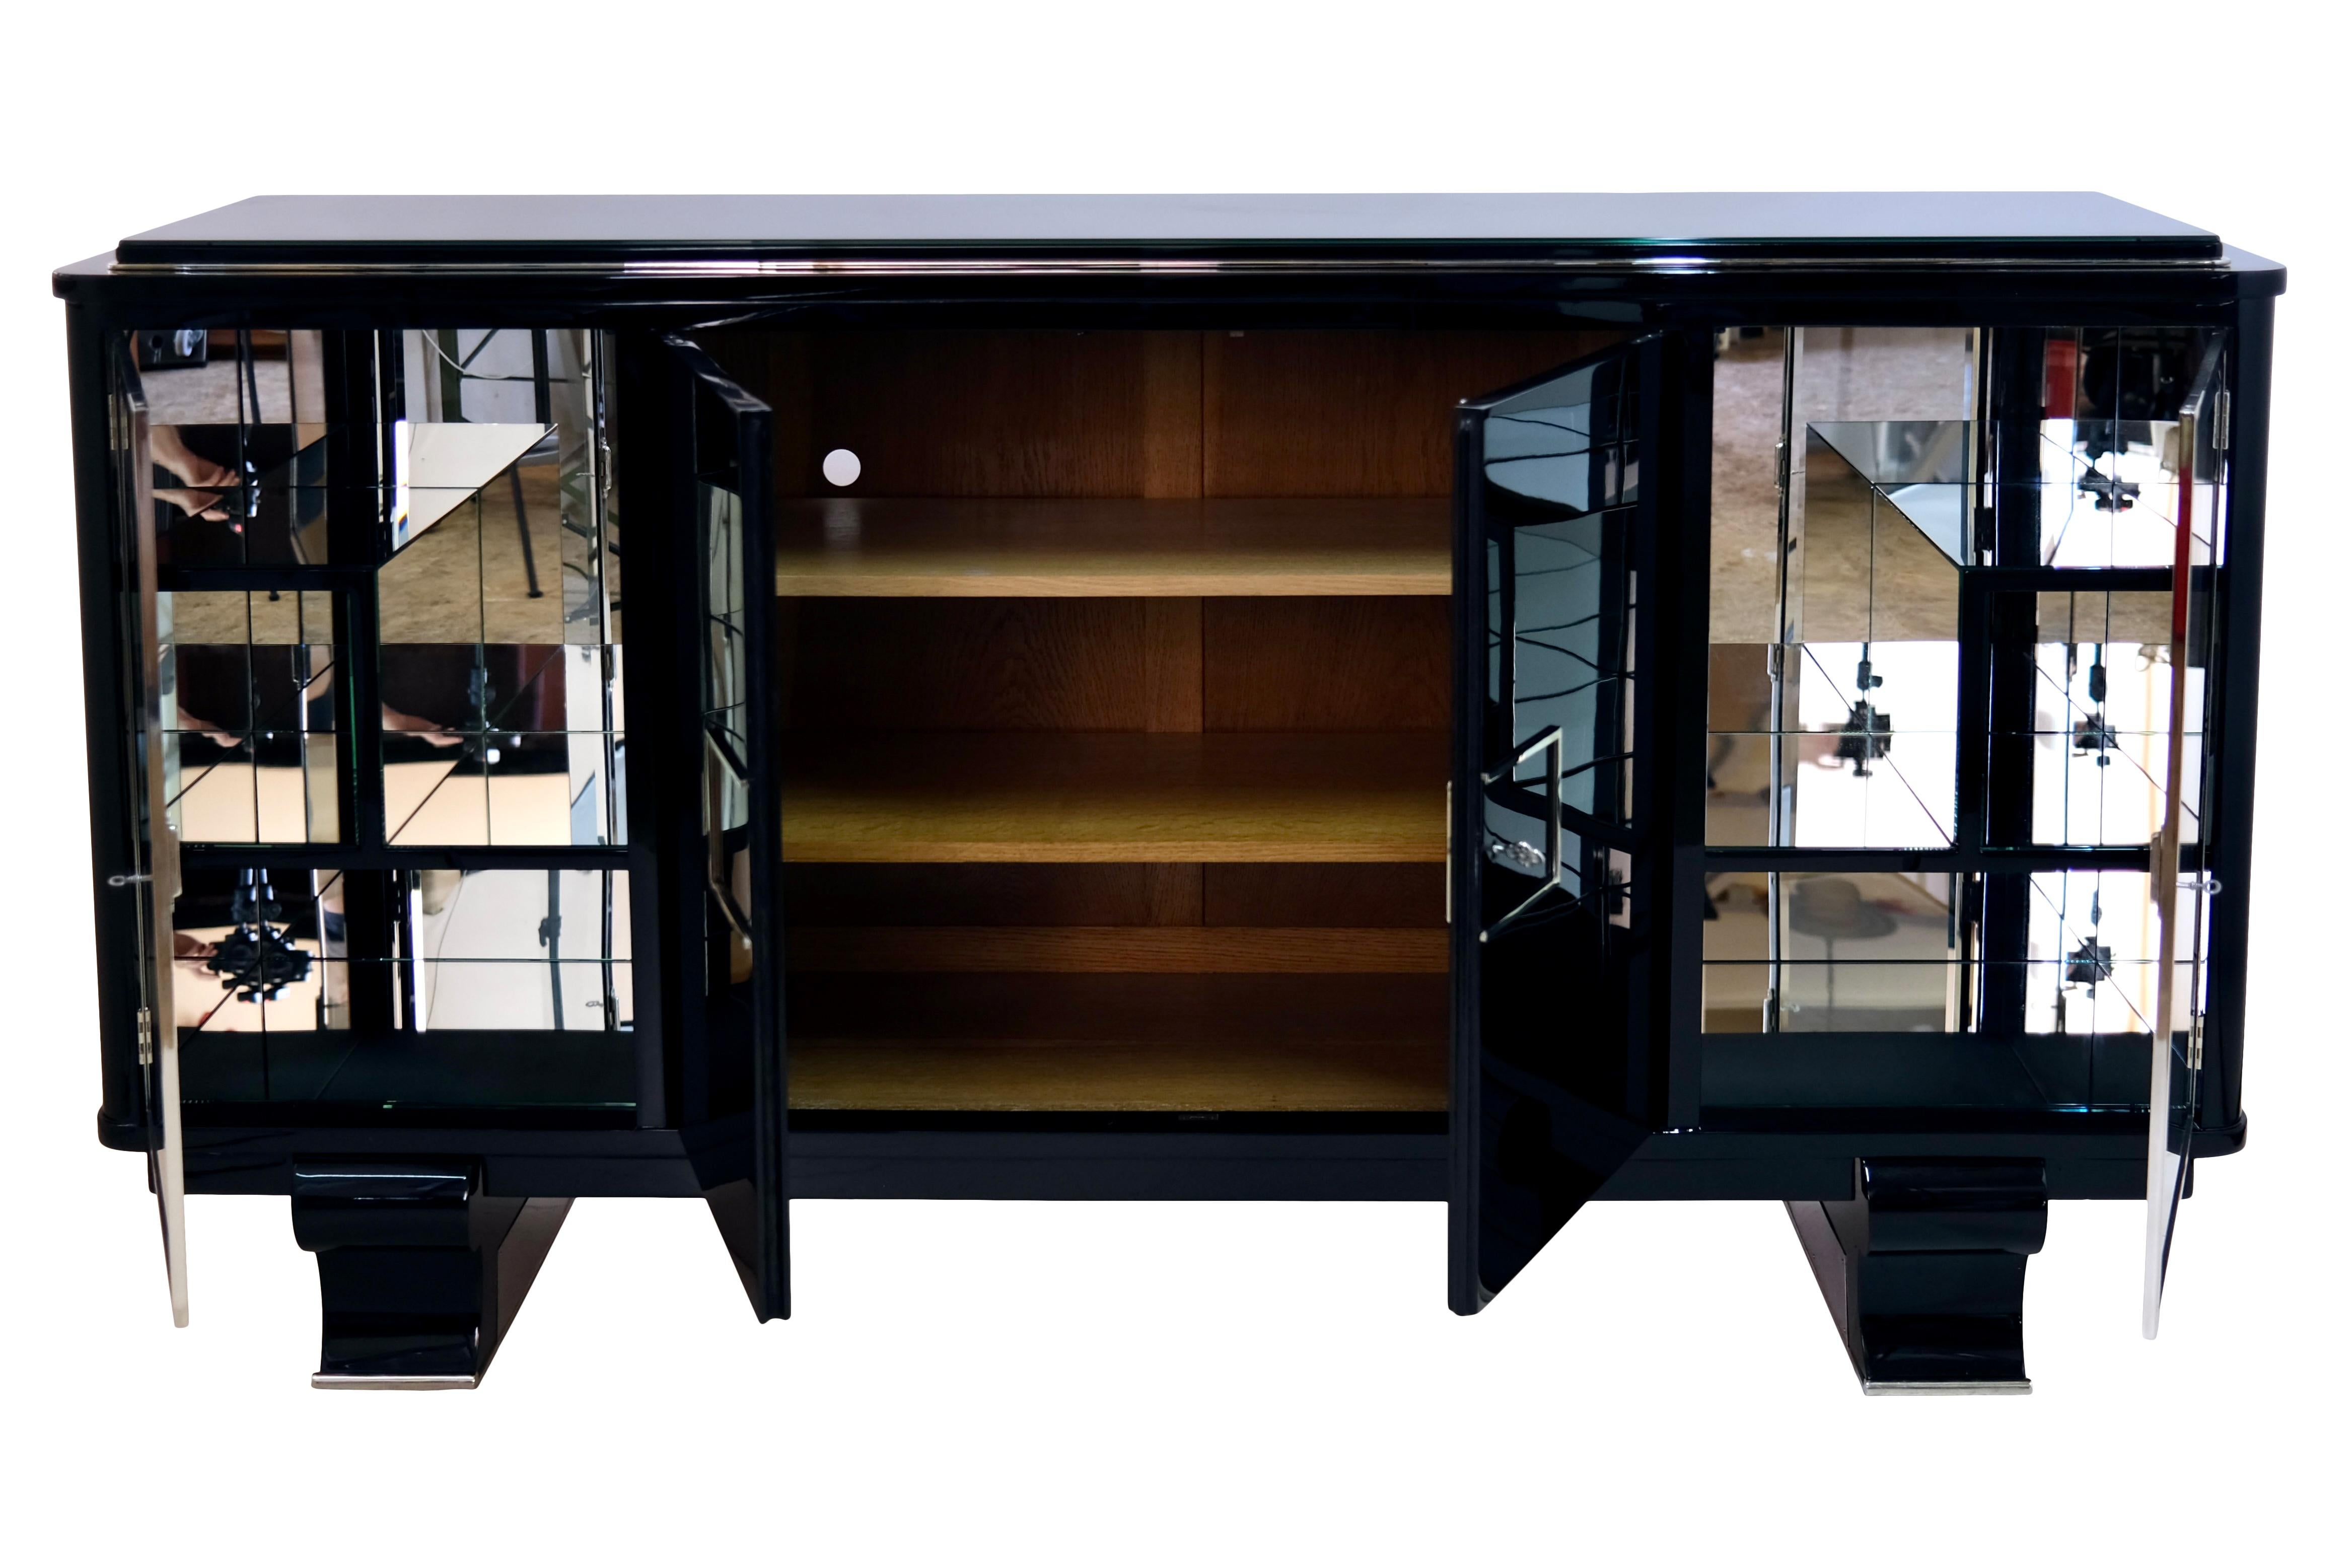 Modernist Sideboard
Piano lacquer, black high gloss
Large central compartment, two-door opening
Side, mirrored compartments behind transparent glass doors

Original Art Deco, France 1930/40s

Dimensions:
Width: 198 cm
Height: 106 cm
Depth: